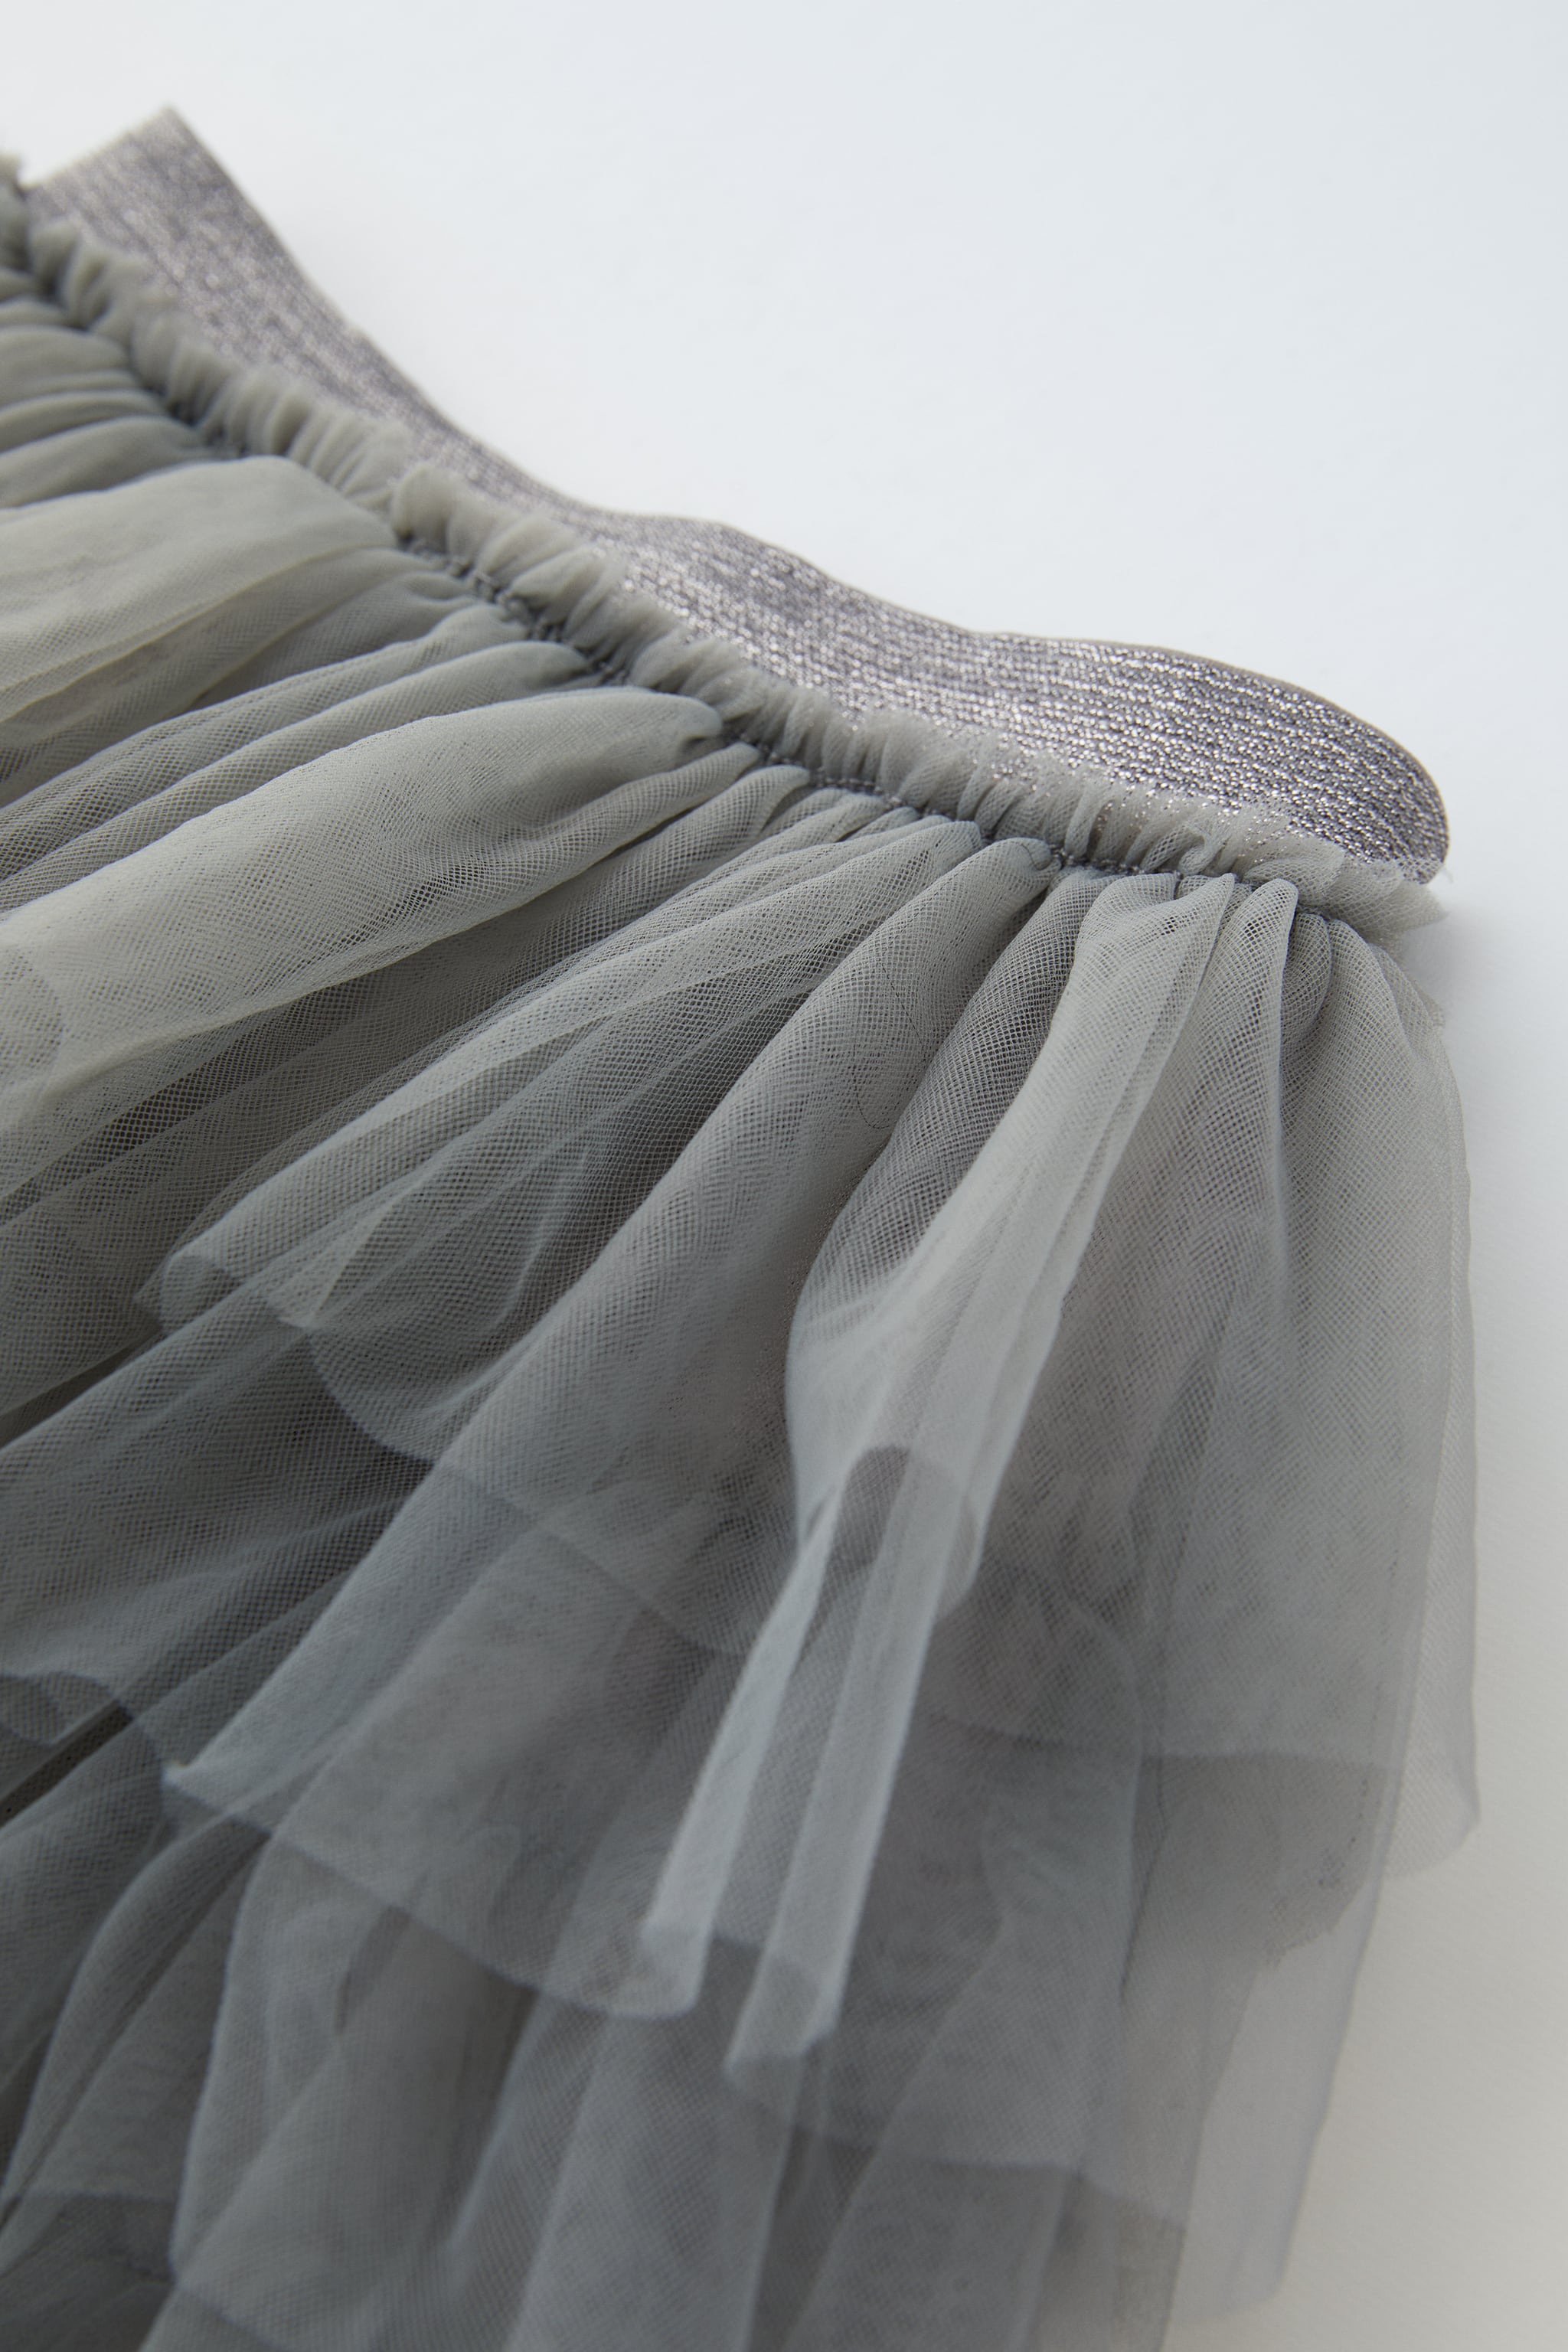 SPARKLY TULLE SKIRT